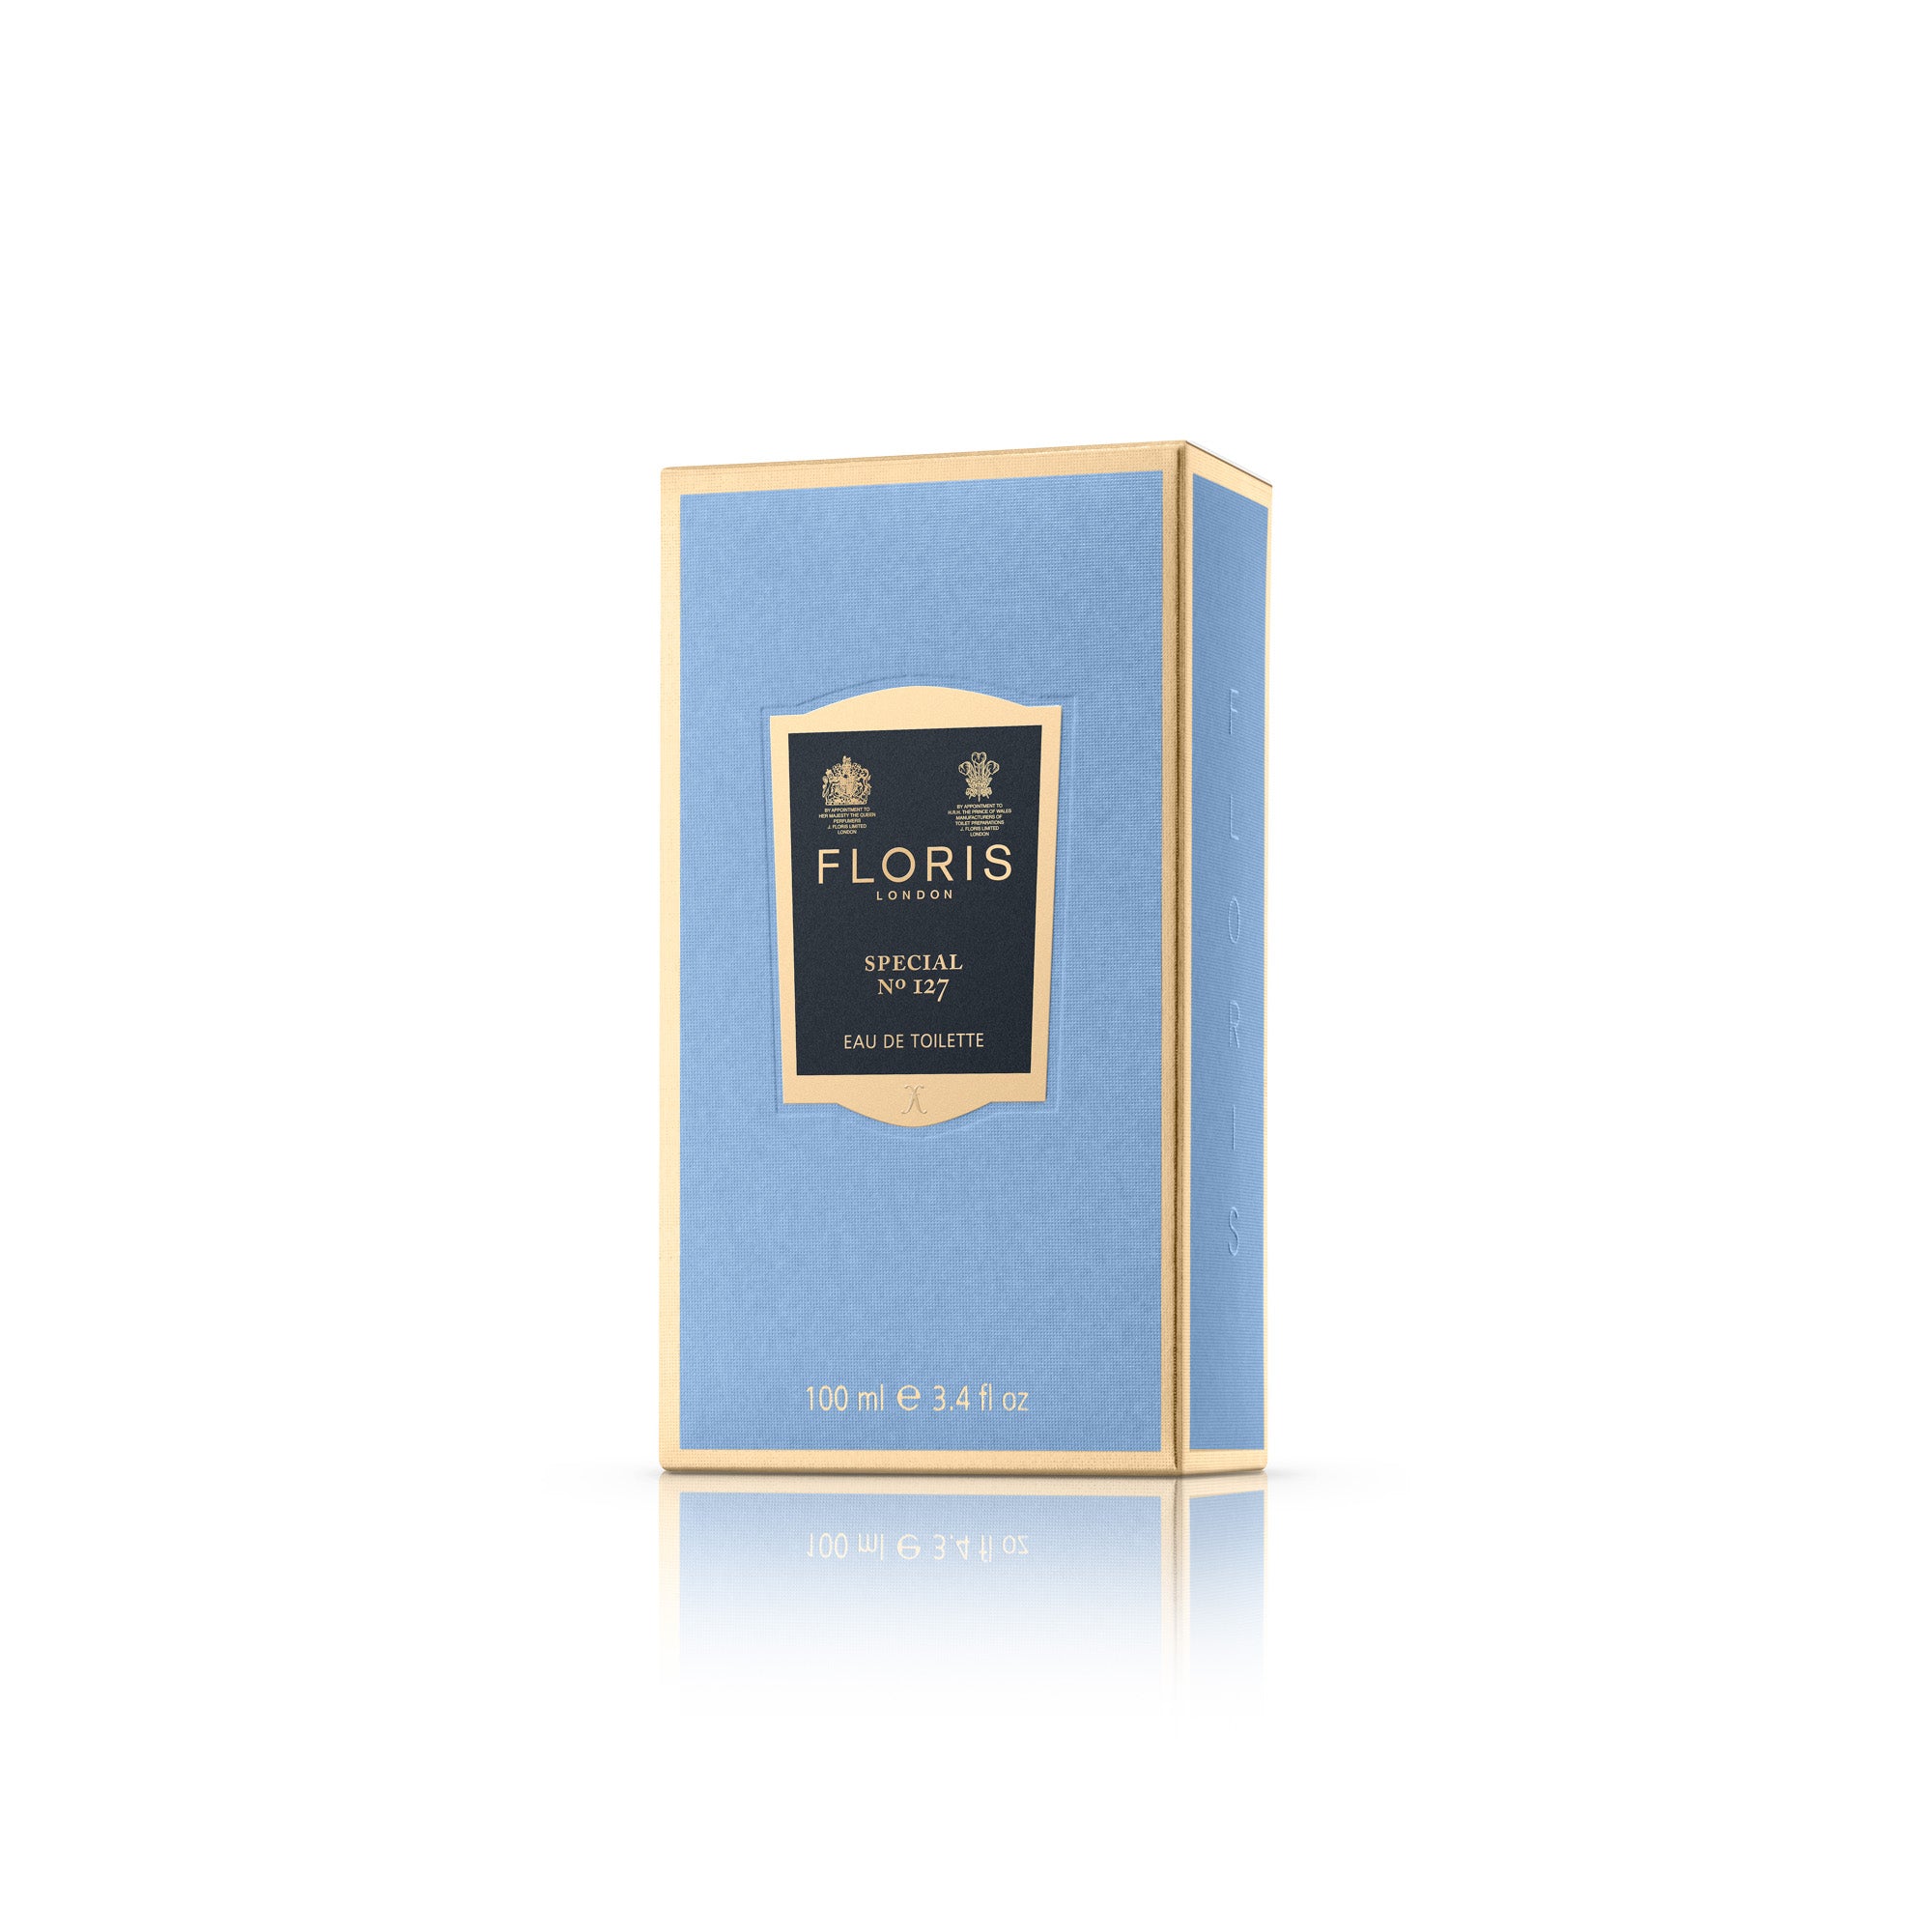 A blue box containing FLORIS Special 127 100 ML fragrance with a citrus floral scent and a gold label on it by KirbyAllison.com.